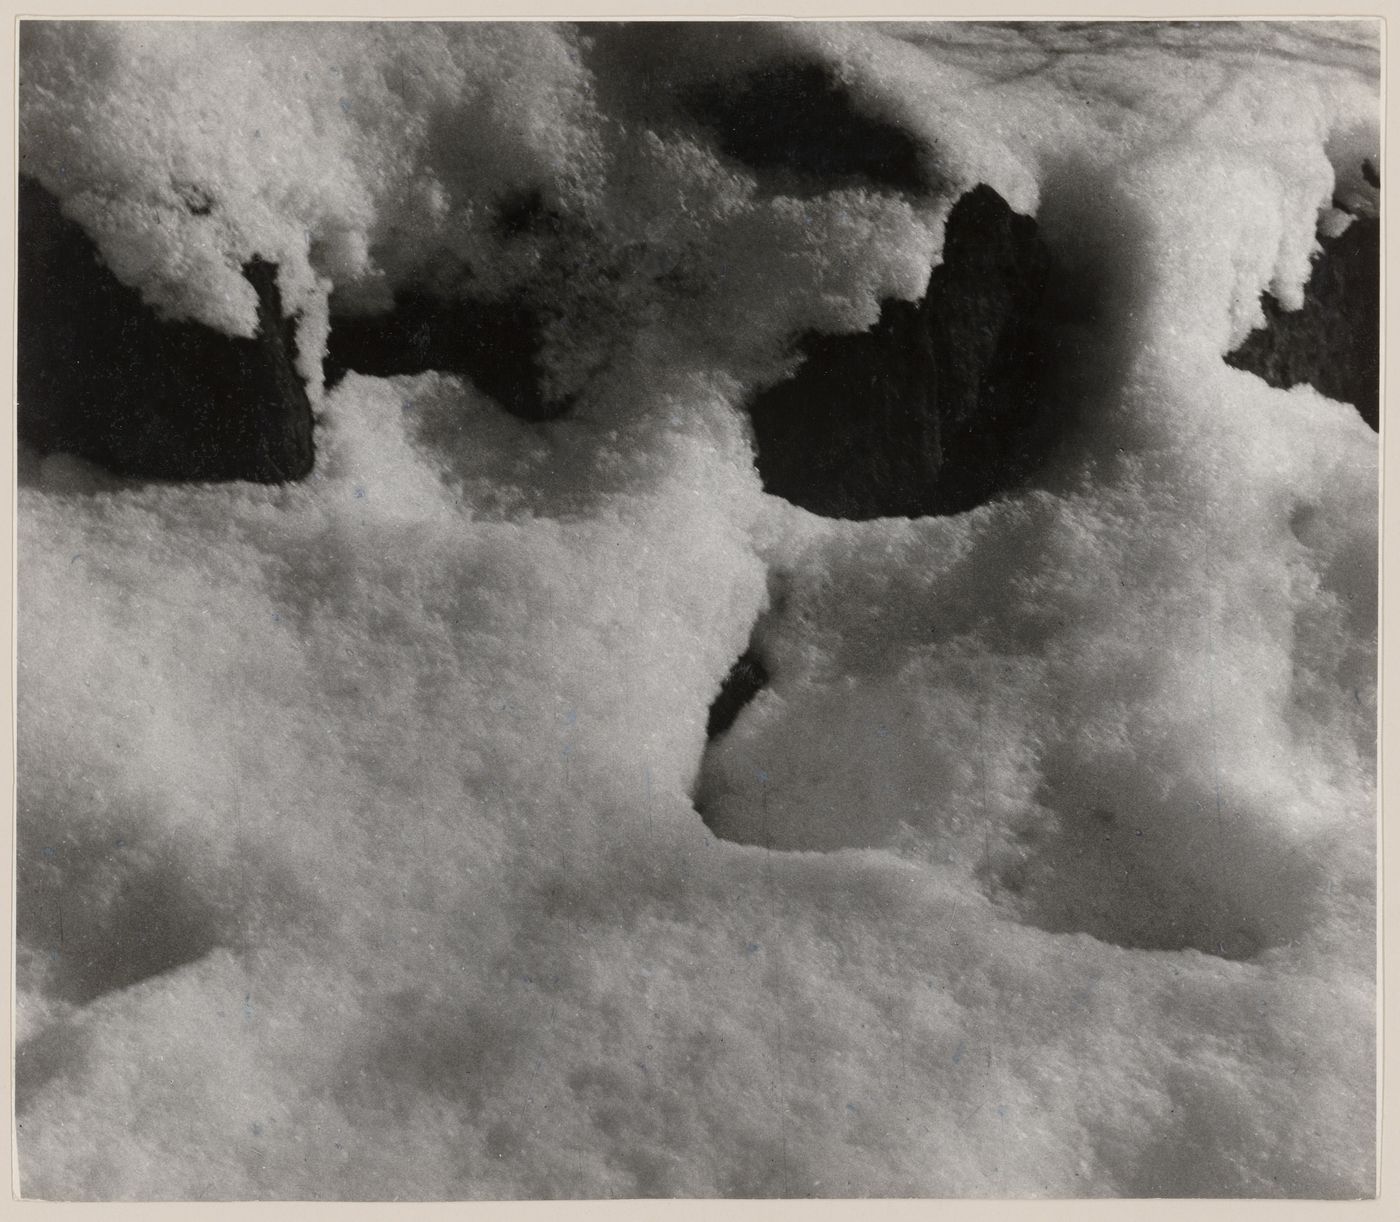 Abstract view of a snow bank